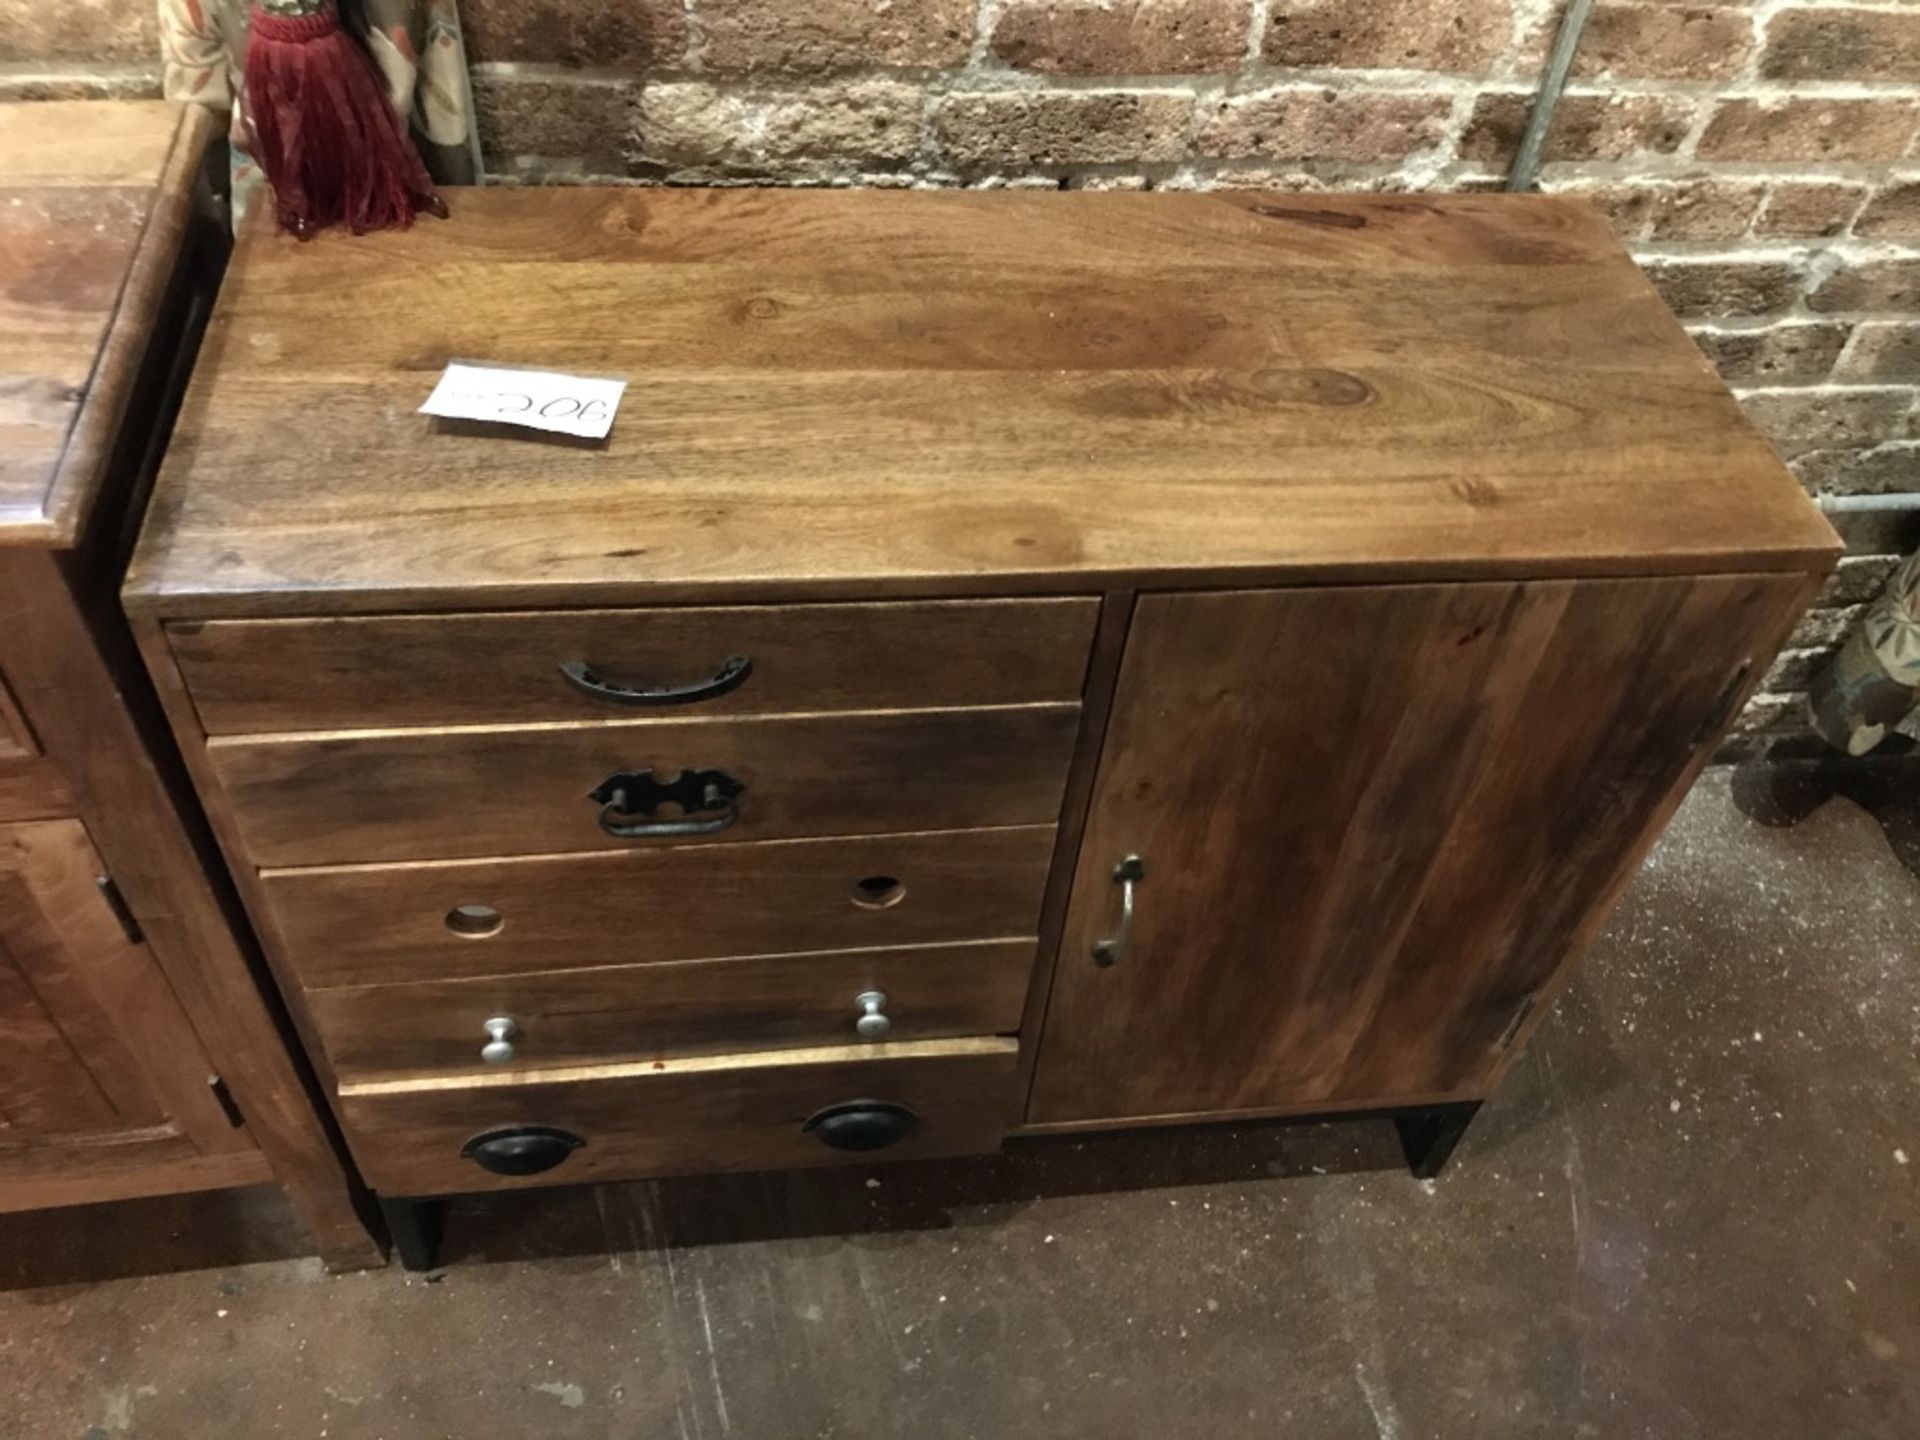 LOT OF: (2) WOODEN CHESTS